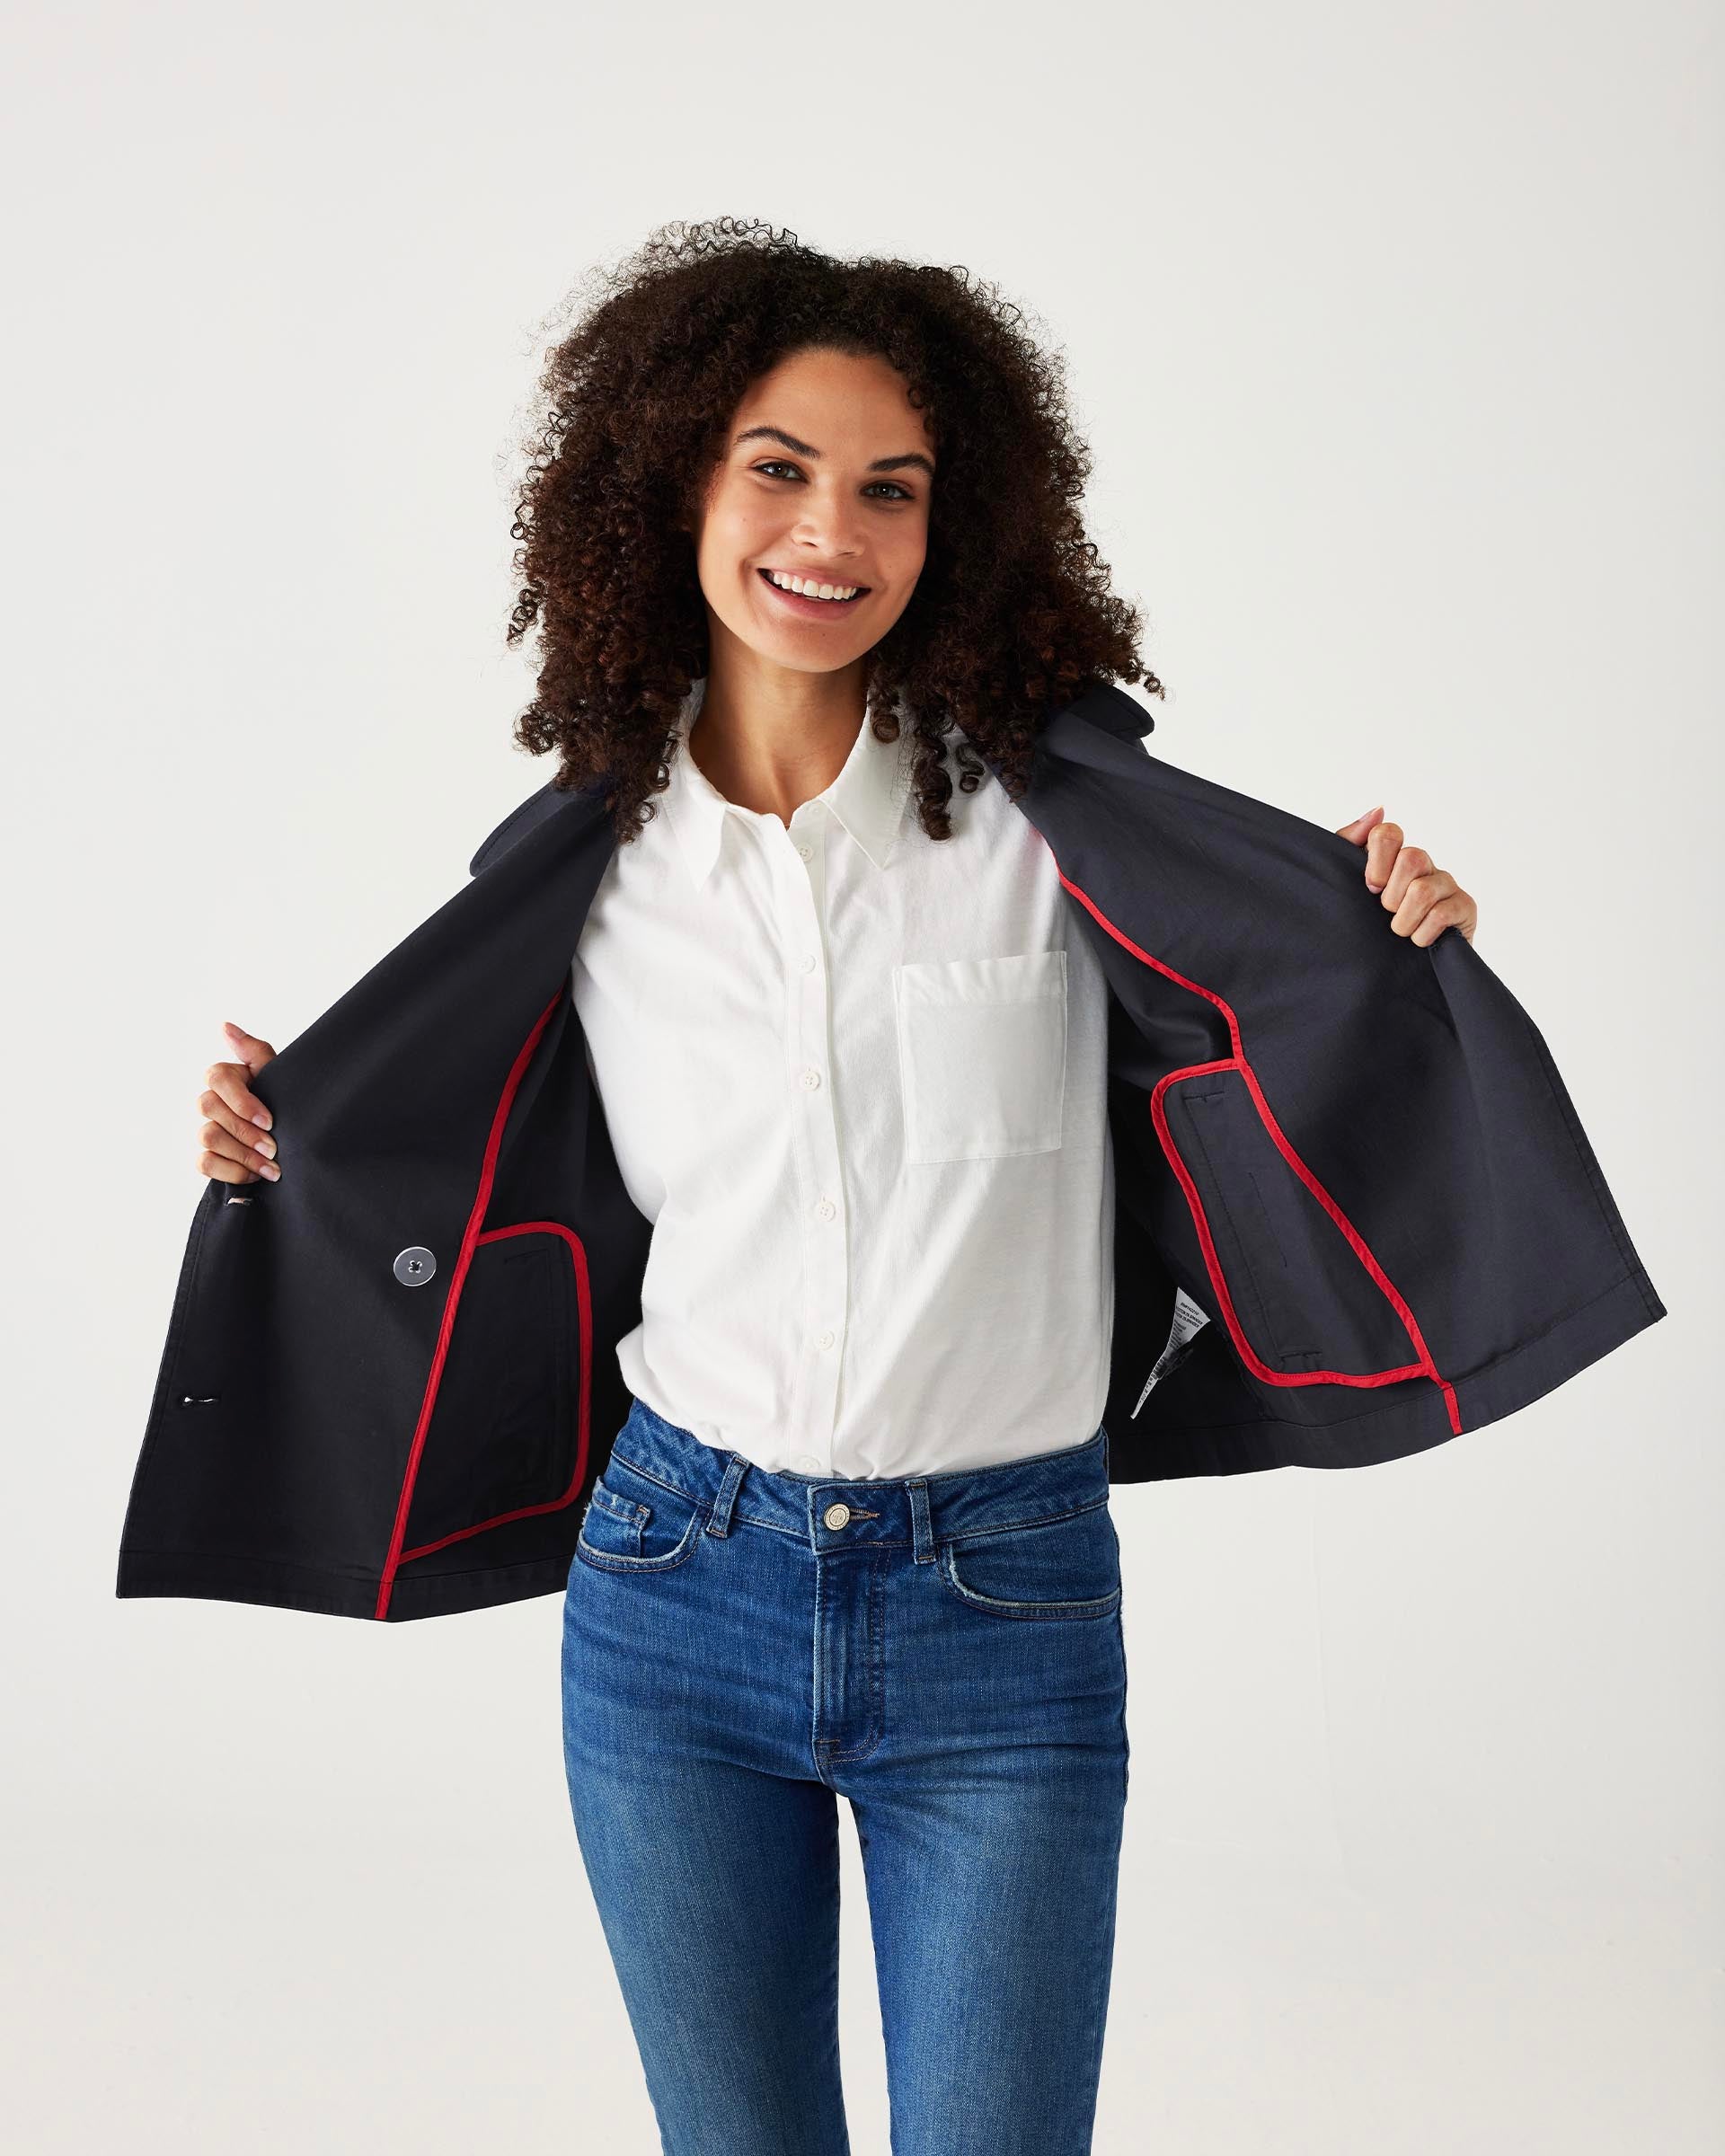 female wearing navy twill peacoat over a white collared shirt with blue jeans on a white background